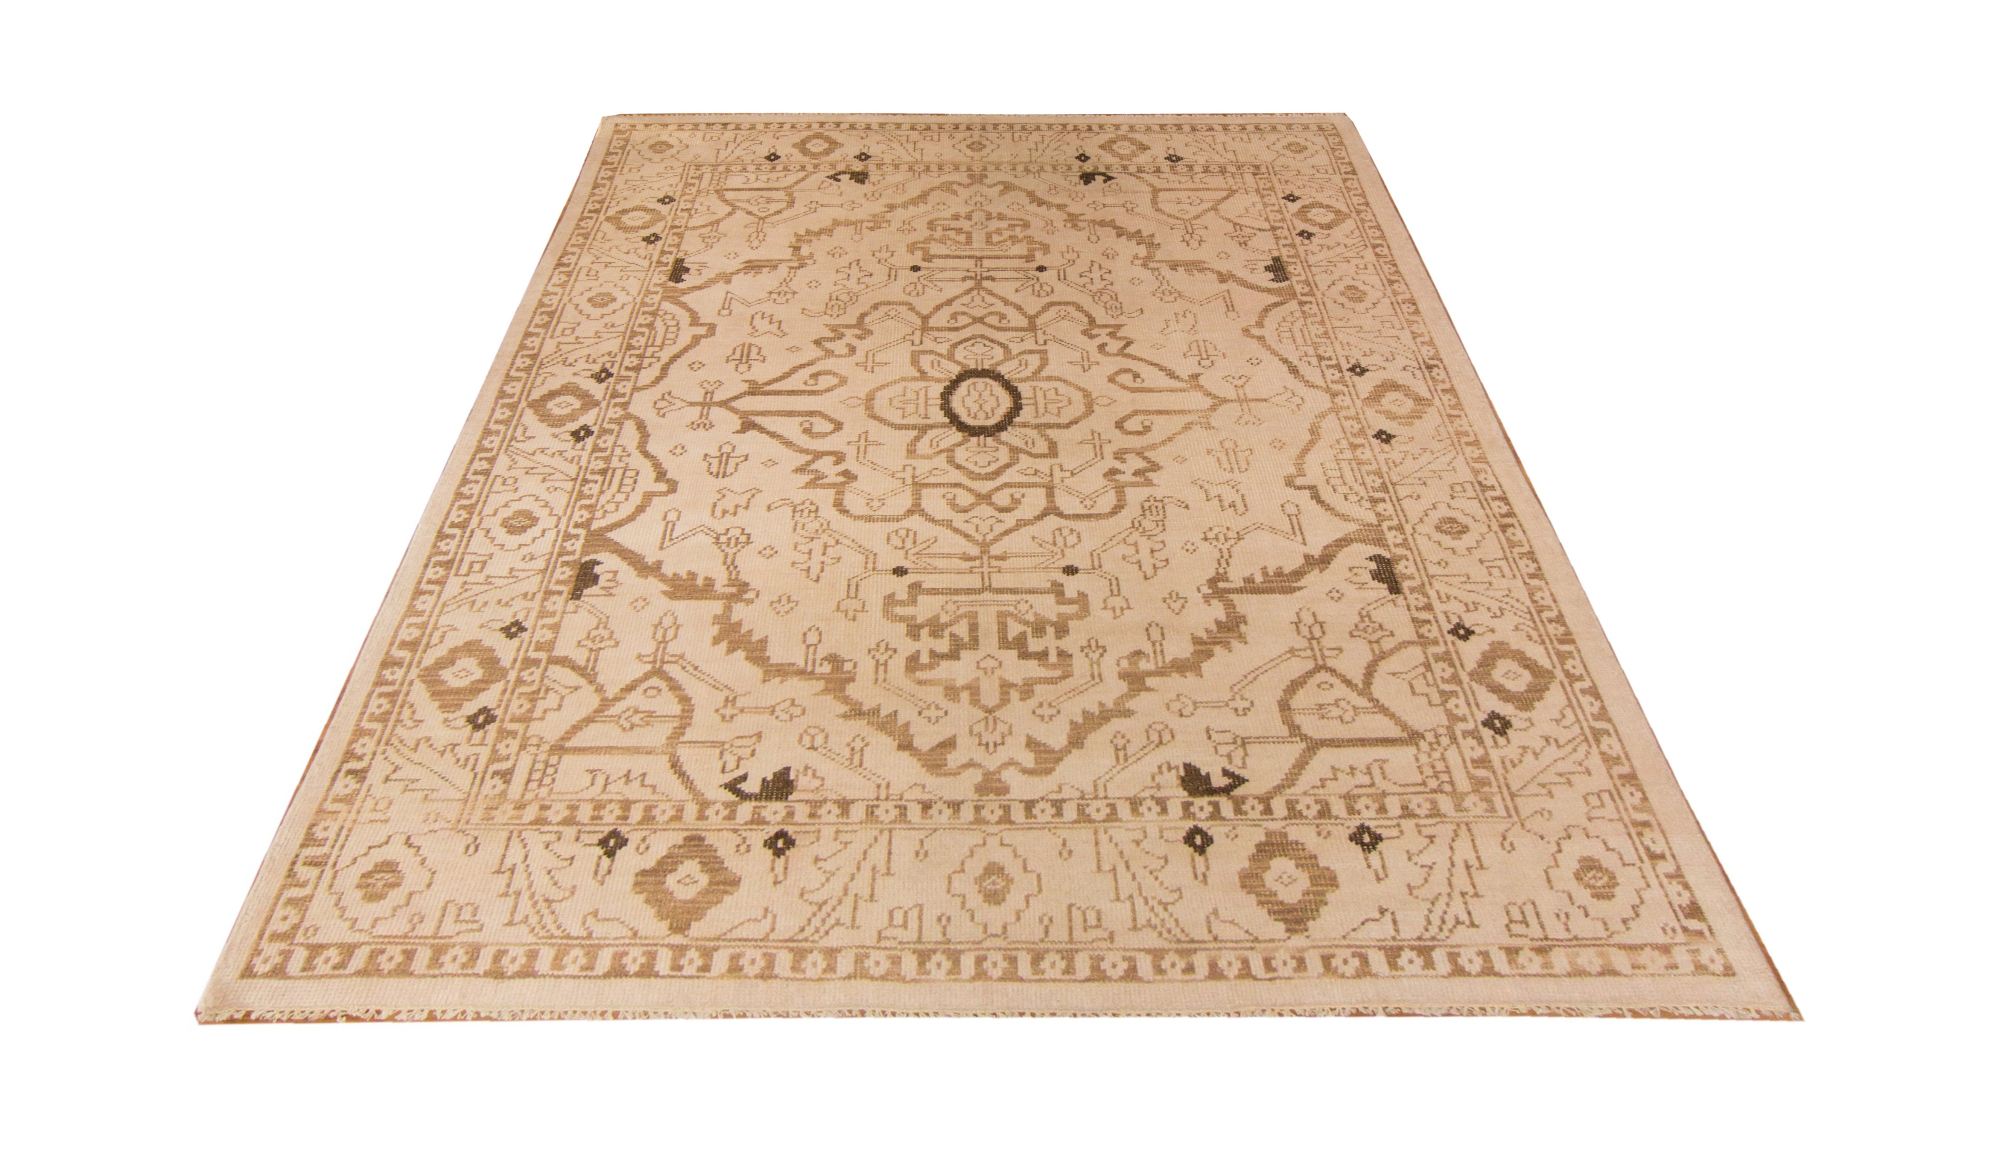 Patchwork Beige Hand Knotted Rug 8'0